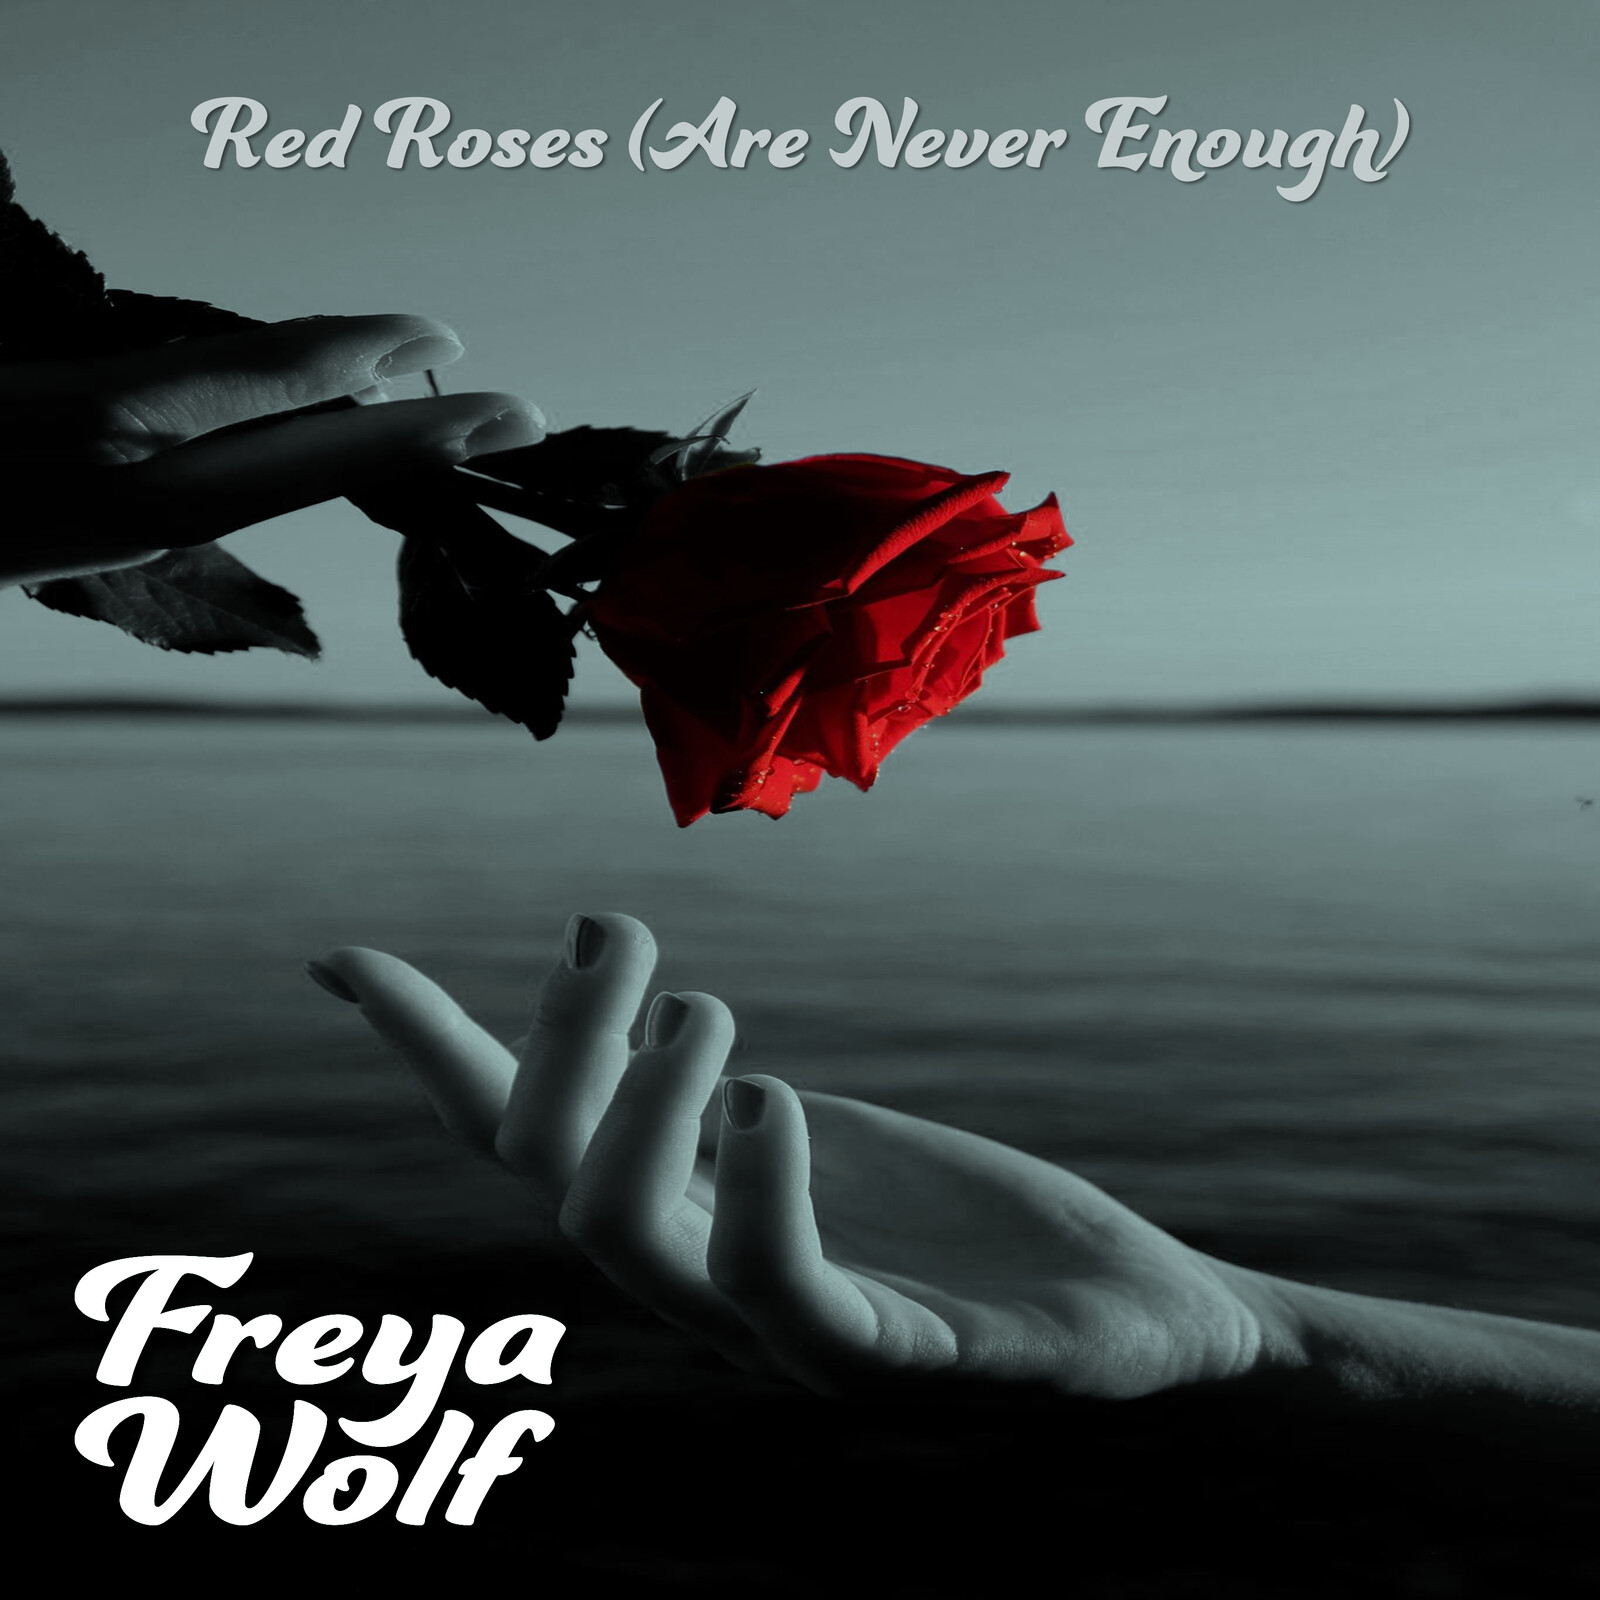 Freya Wolf - "Red Roses are Never Enough" single cover.

Image supplied by client.